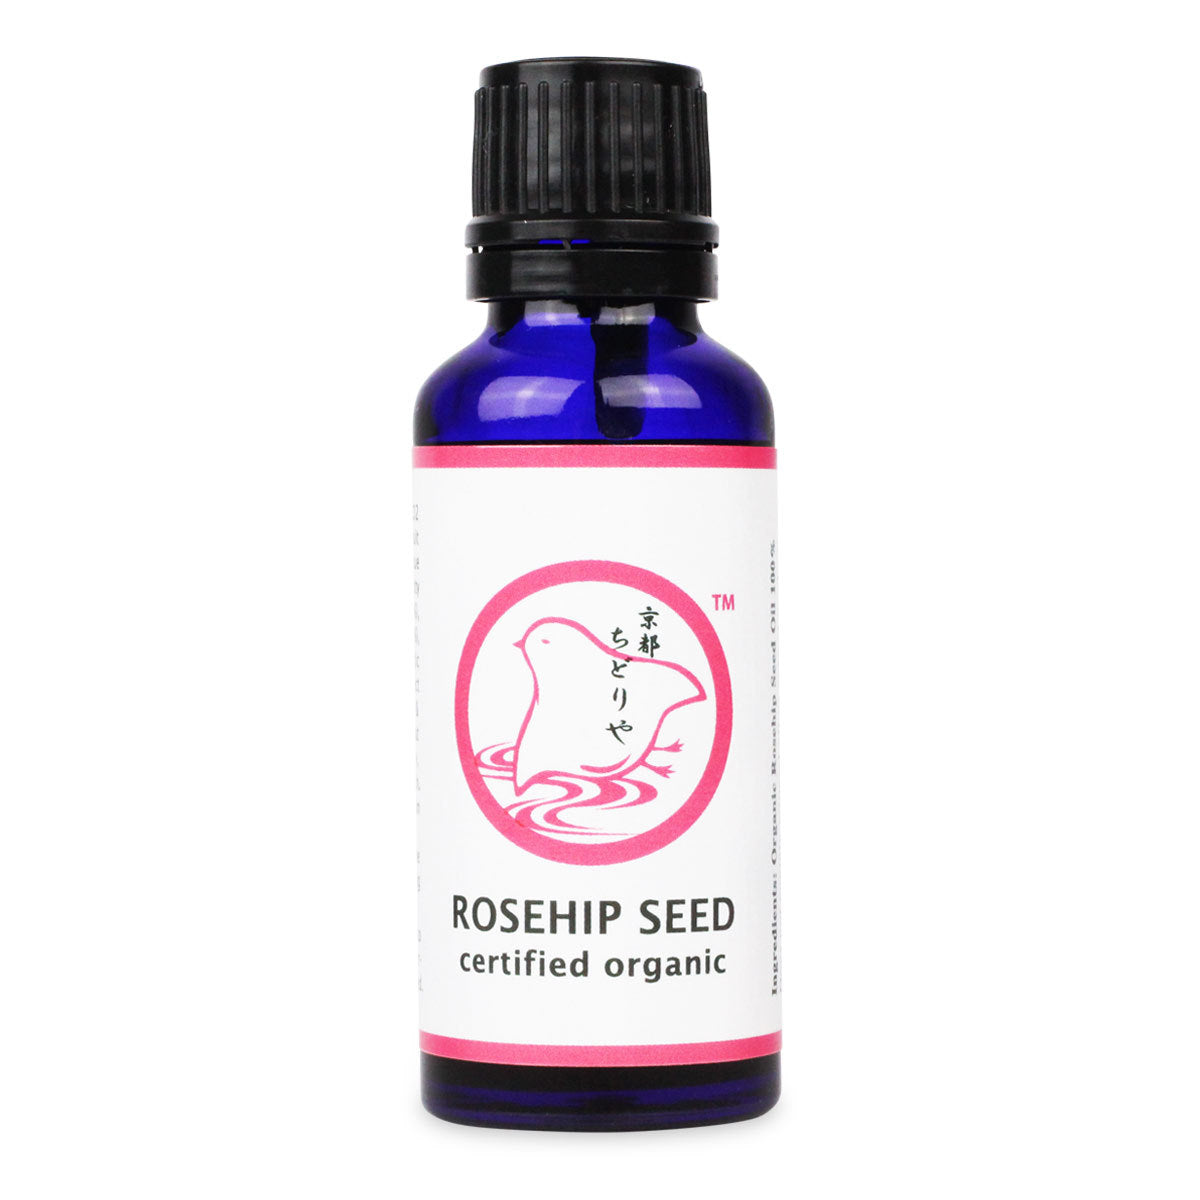 Primary image of Organic Rosehip Seed Oil